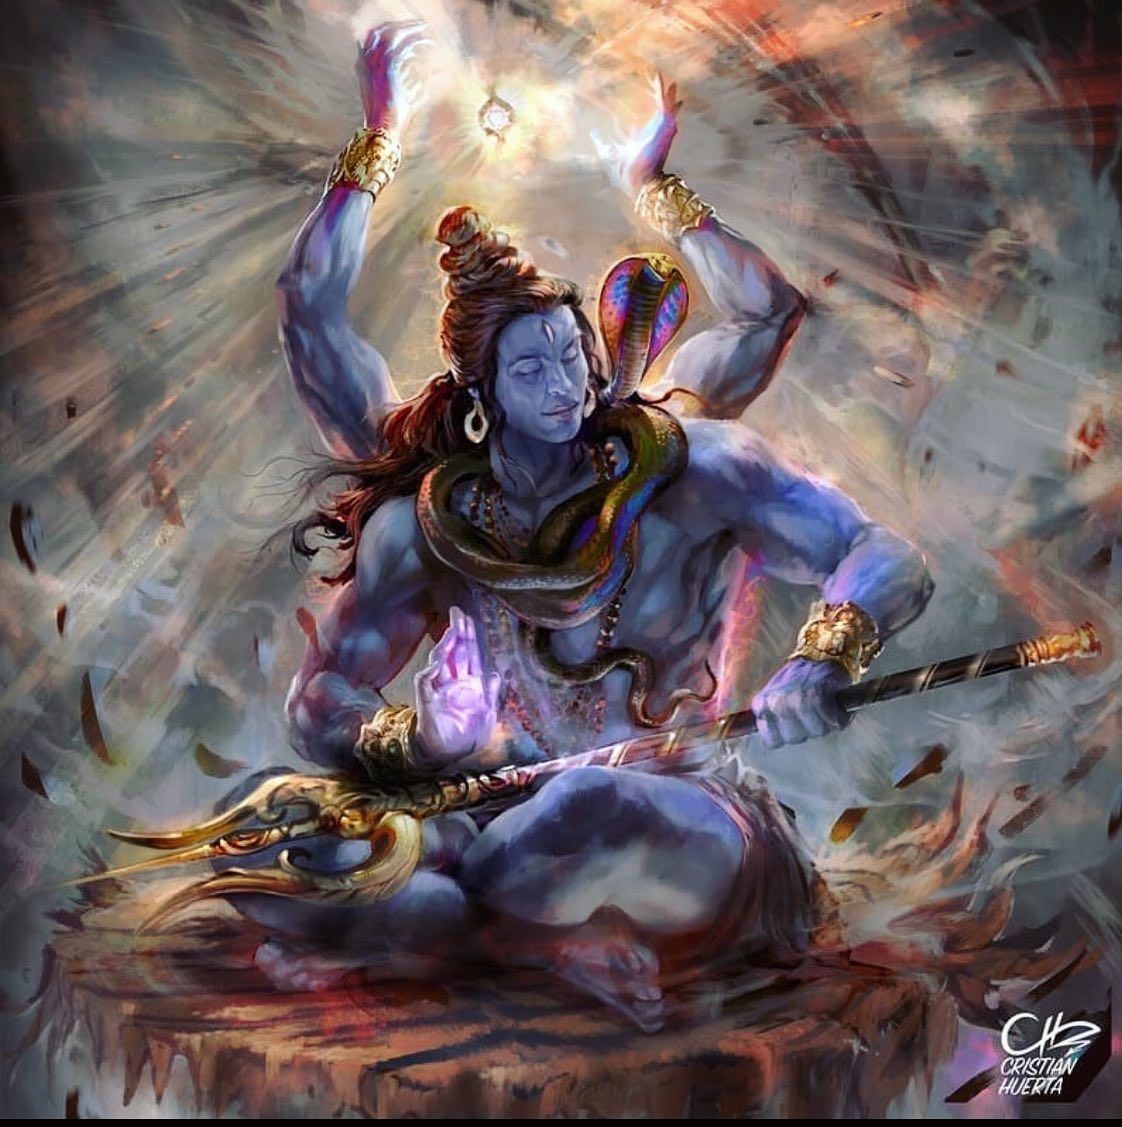 Shiva is a paradoxical deity: both the destroyer and the restorer, the great ascetic and the symbol of sensuality, the. Shiva art, Angry lord shiva, Aghori shiva